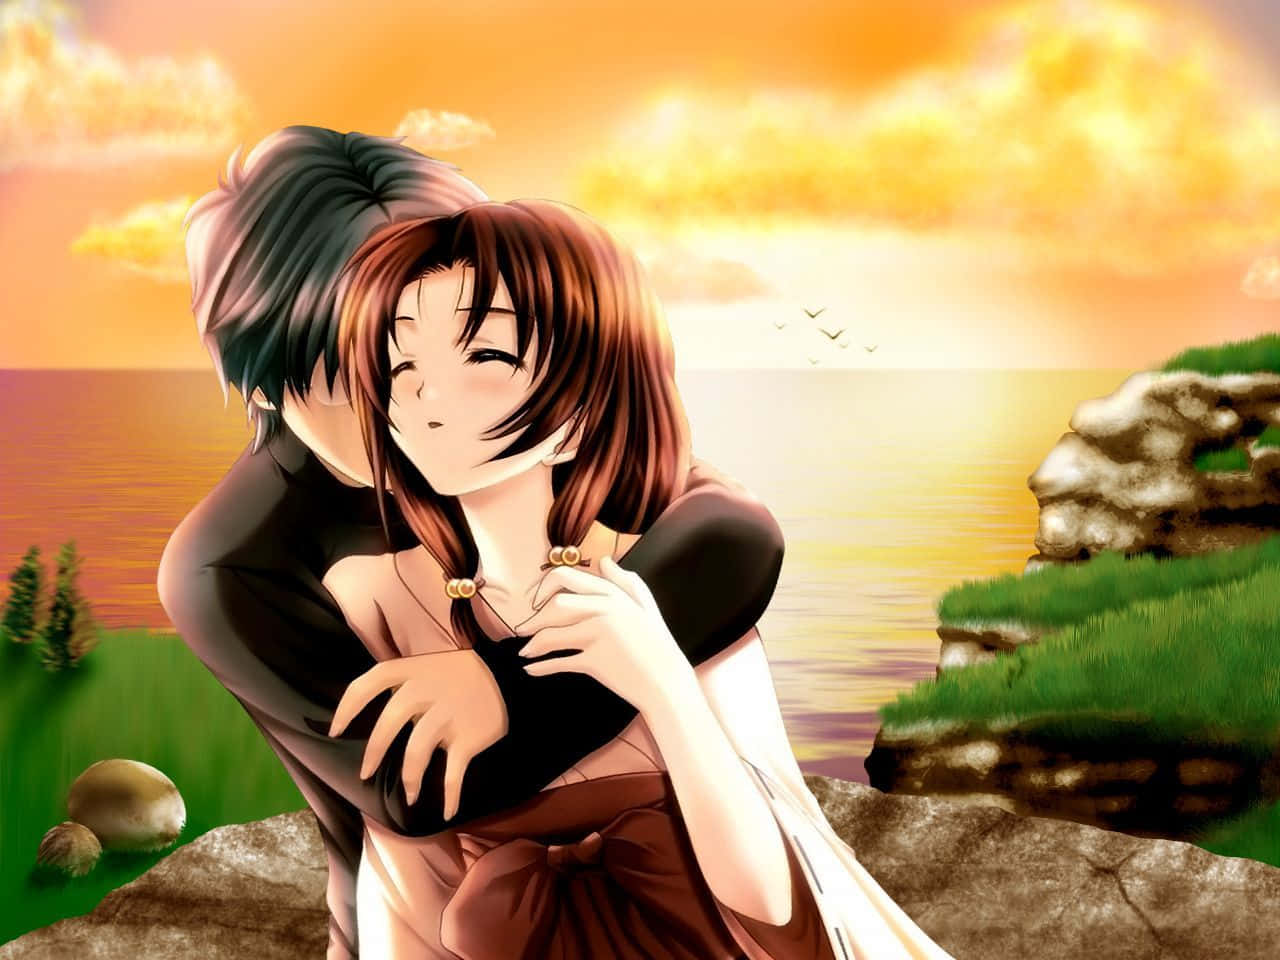 The 15 Wholesome Romance Anime With Little To No Drama